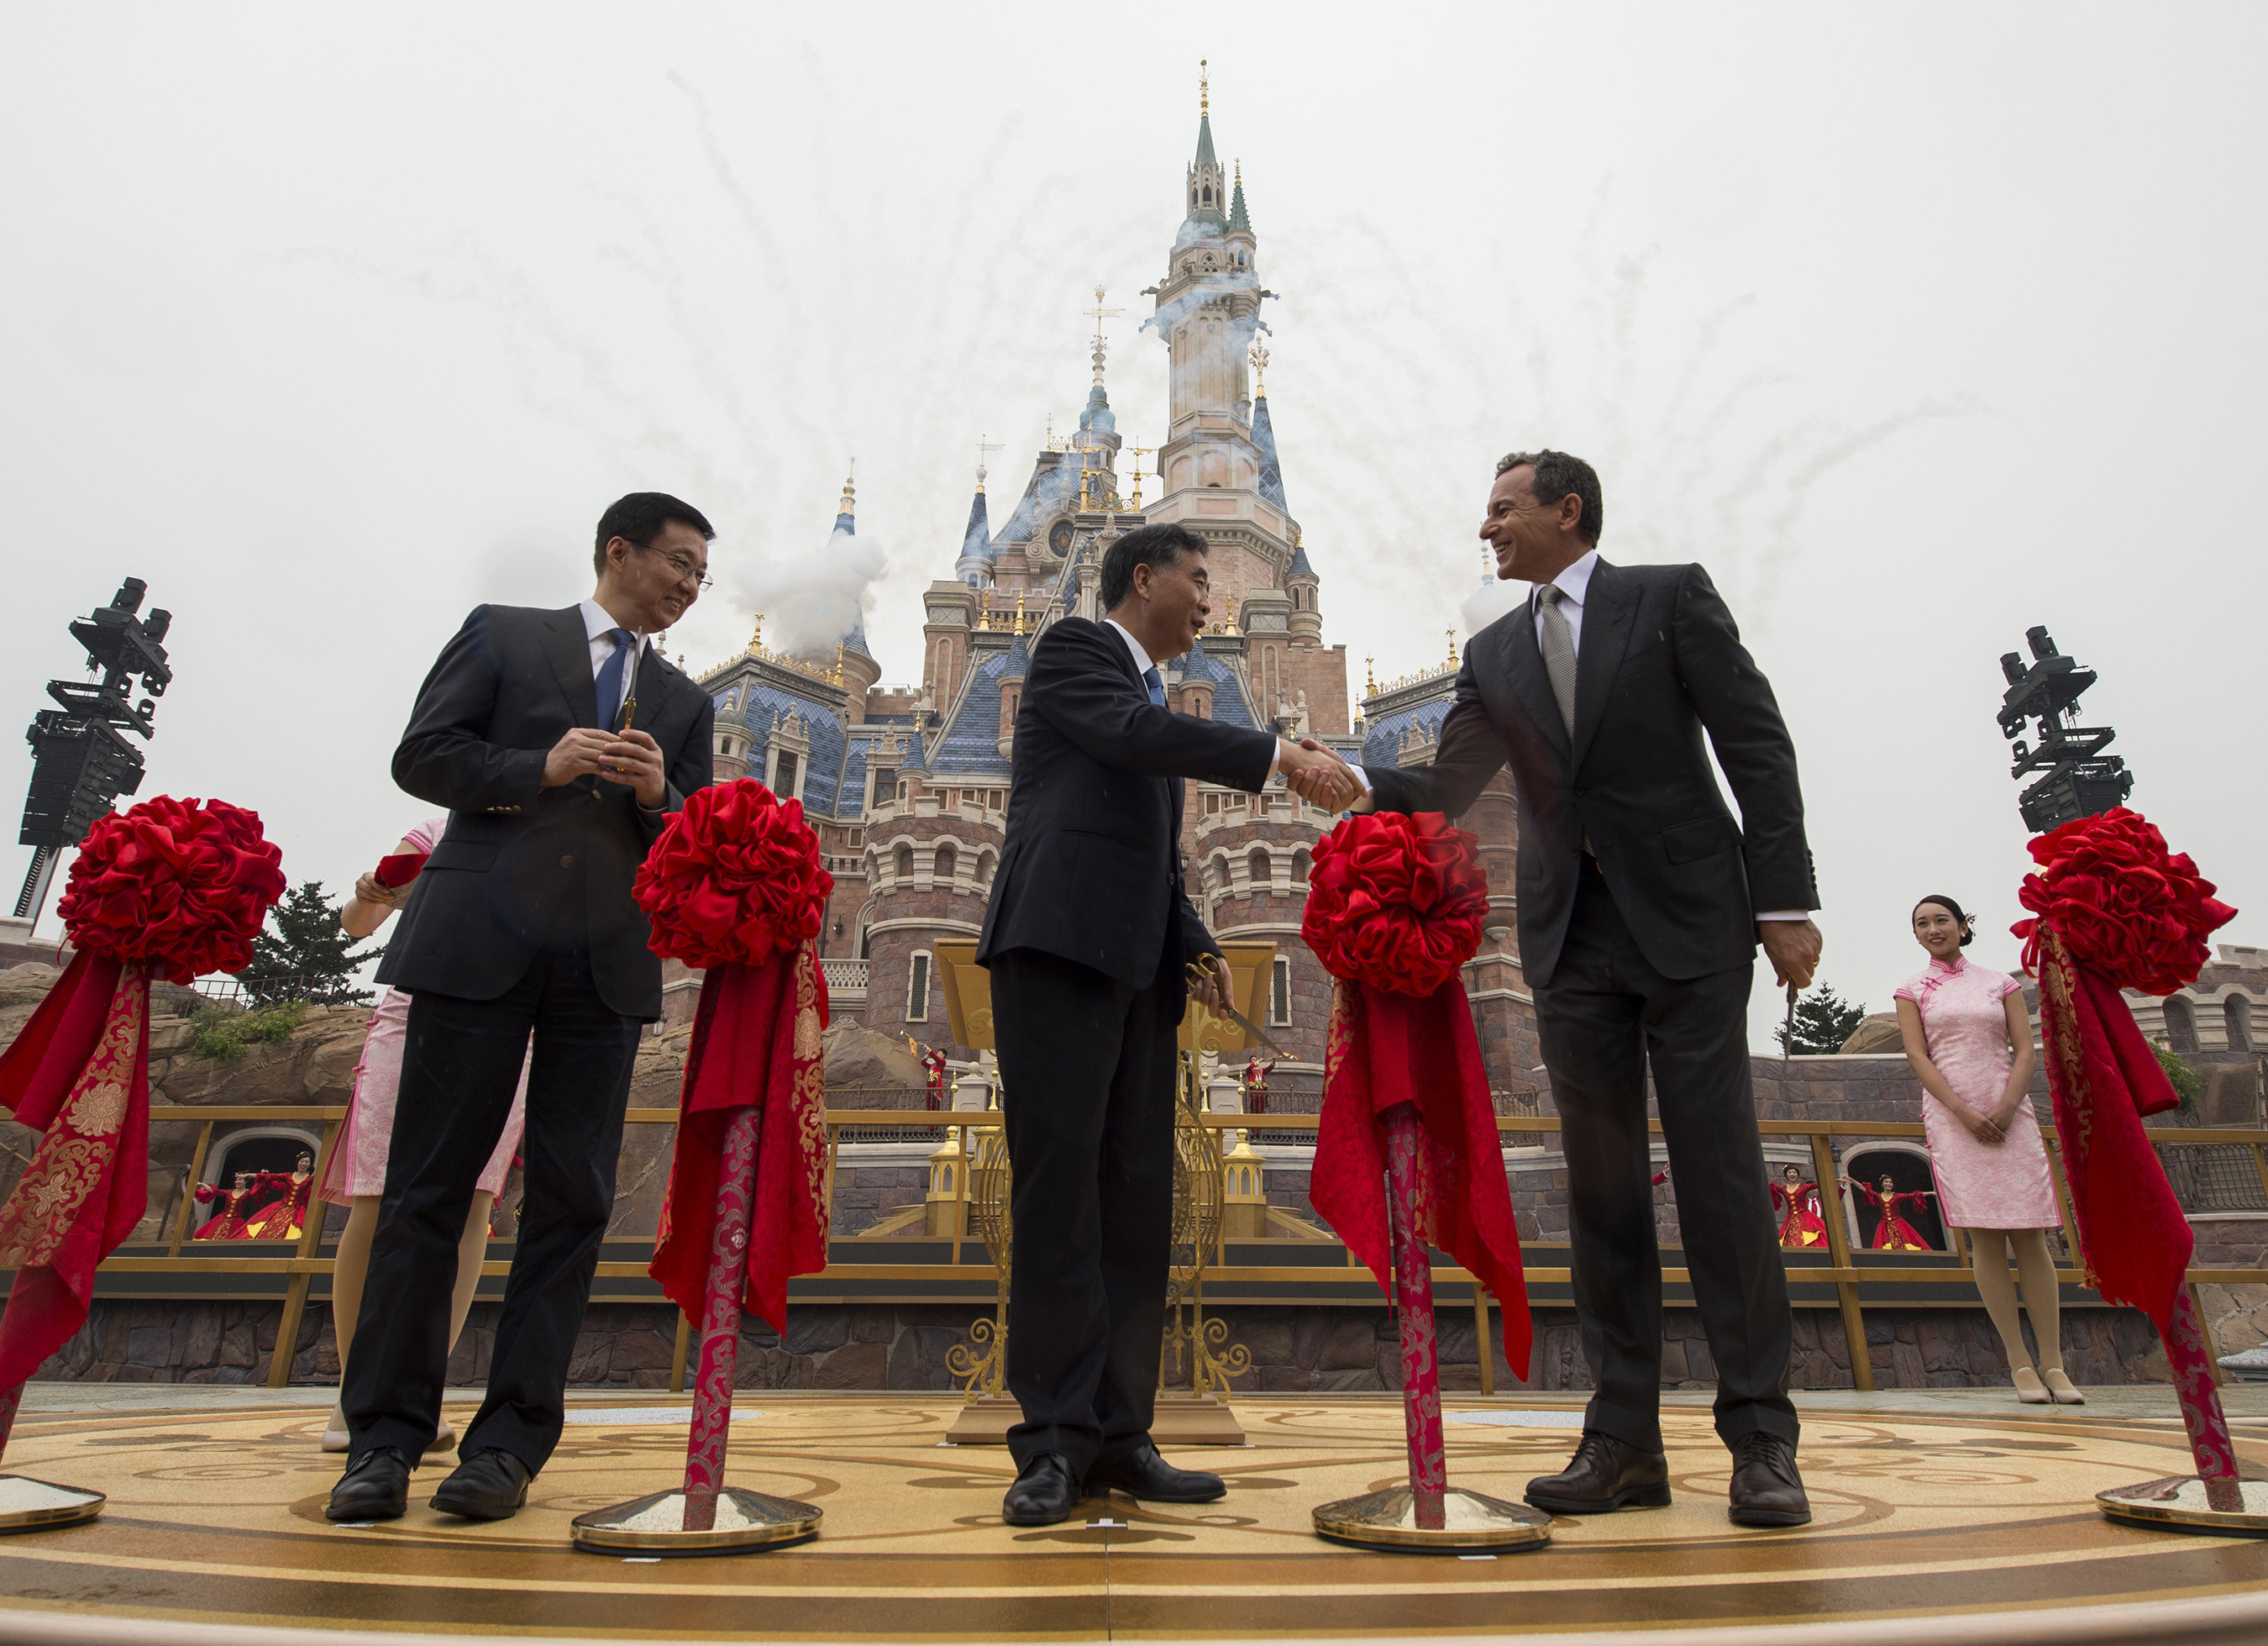 Thousands of invited guests celebrated the Grand Opening of Shanghai Disney Resort today with the help of a flood of Shanghai Disney cast members and Disney character friends at a dedication ceremony. Bob Iger, chairman and CEO of The Walt Disney Company (right) joined Chinese CPC Politburo members Wang Yang, State Council Vice Premier (middle), and Han Zheng, Party Secretary of Shanghai (left), to officially open the resort's new theme park, Shanghai Disneyland, at the iconic Enchanted Storybook Castle.